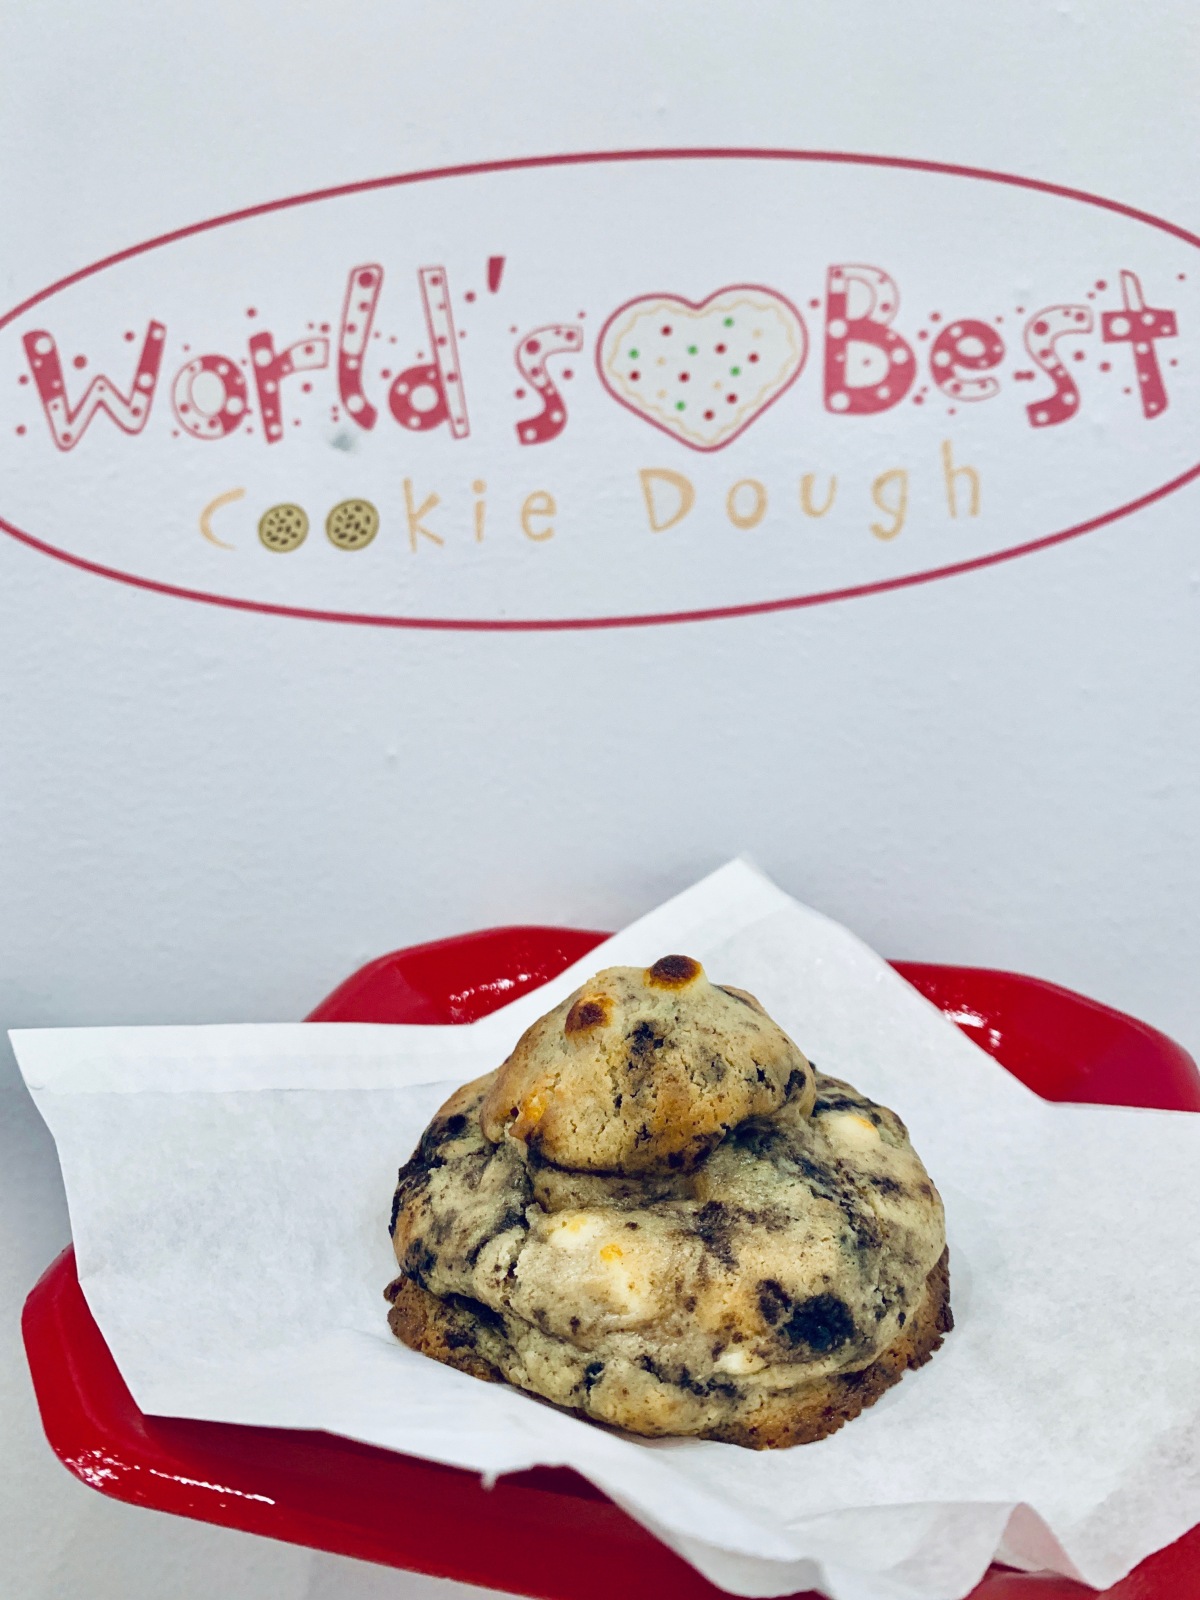 World's Best Cookie Dough oreo  chocolate chip cookie